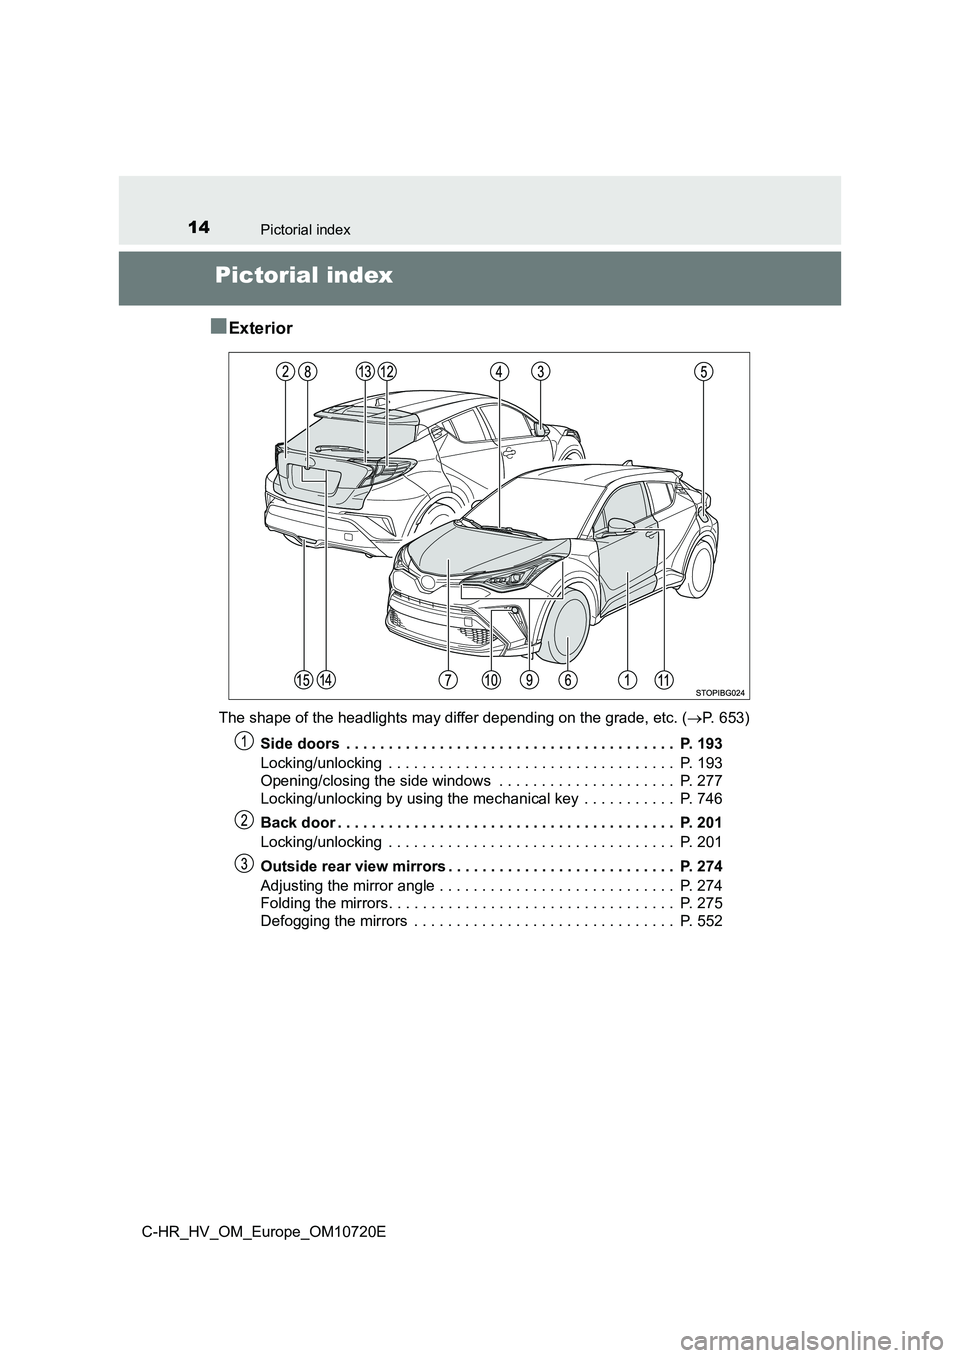 TOYOTA C-HR 2022  Owners Manual 14Pictorial index
C-HR_HV_OM_Europe_OM10720E
Pictorial index 
■Exterior
The shape of the headlights may differ depending on the grade,  etc. (P. 653) 
Side doors  . . . . . . . . . . . . . . . . 